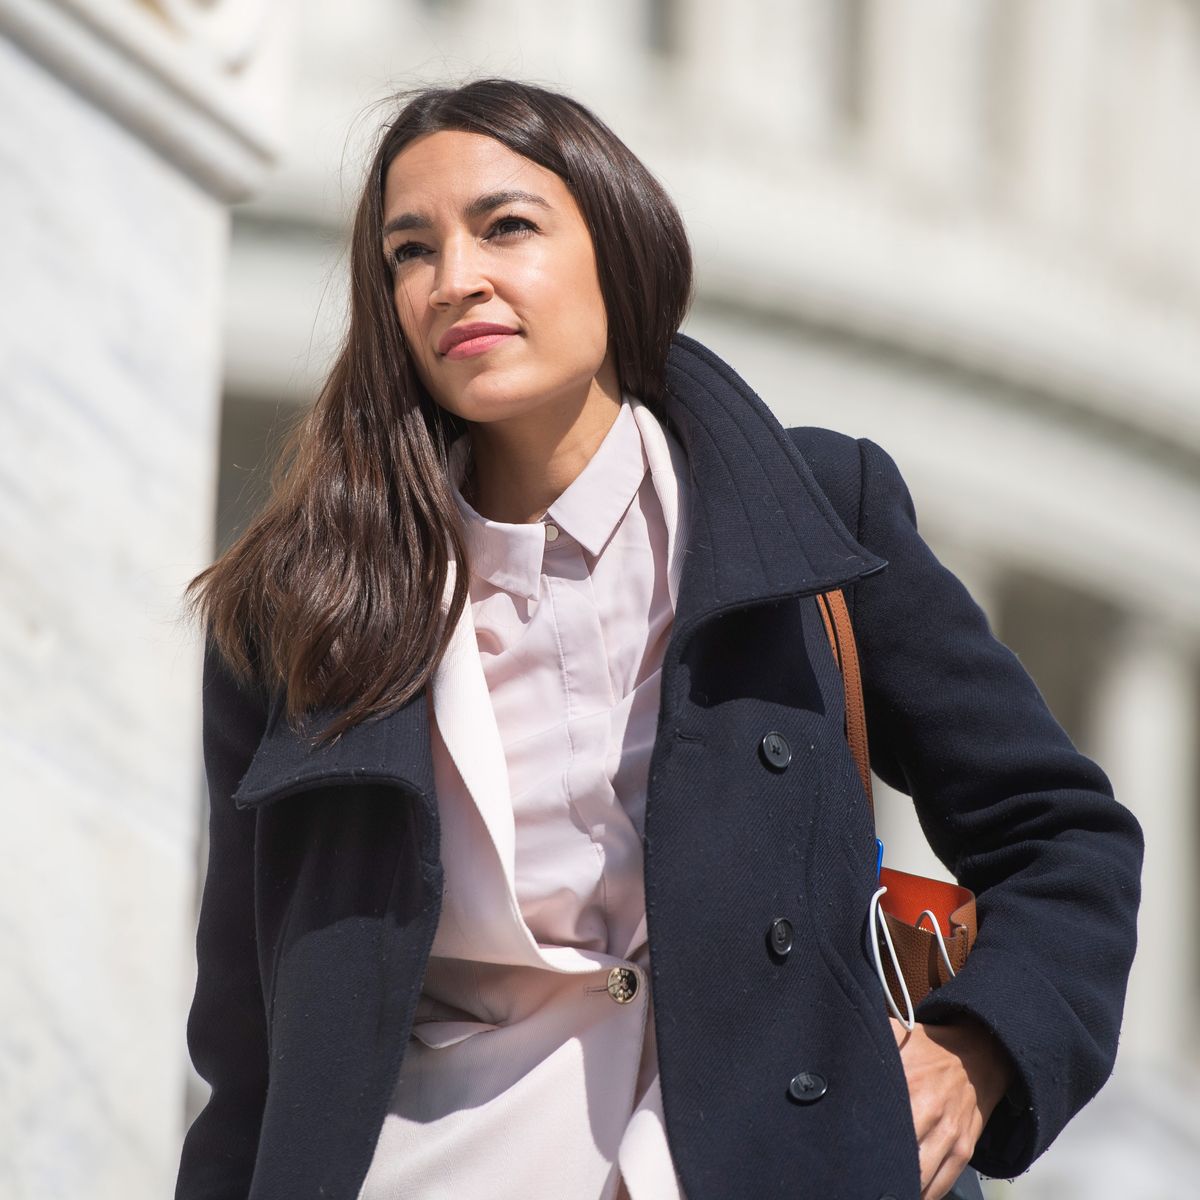 AOC Accosted by Rep. Ted Yoho on the Steps of the Capitol